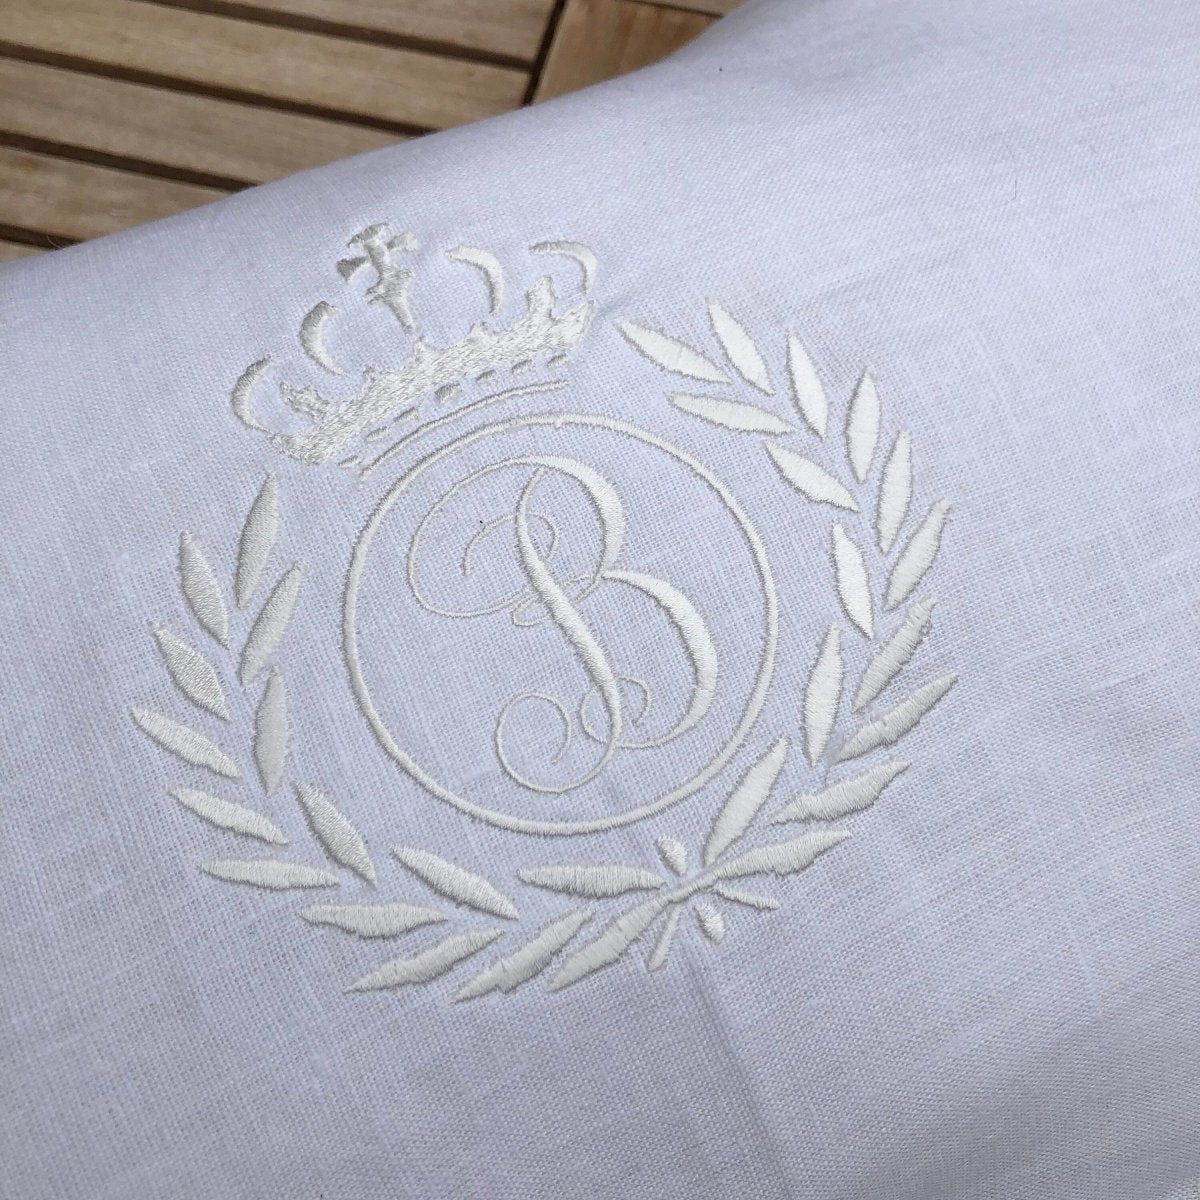 Tassel Linen Cot Crib Rail Cover with embroidered Crown Monogram - Linen and Letters